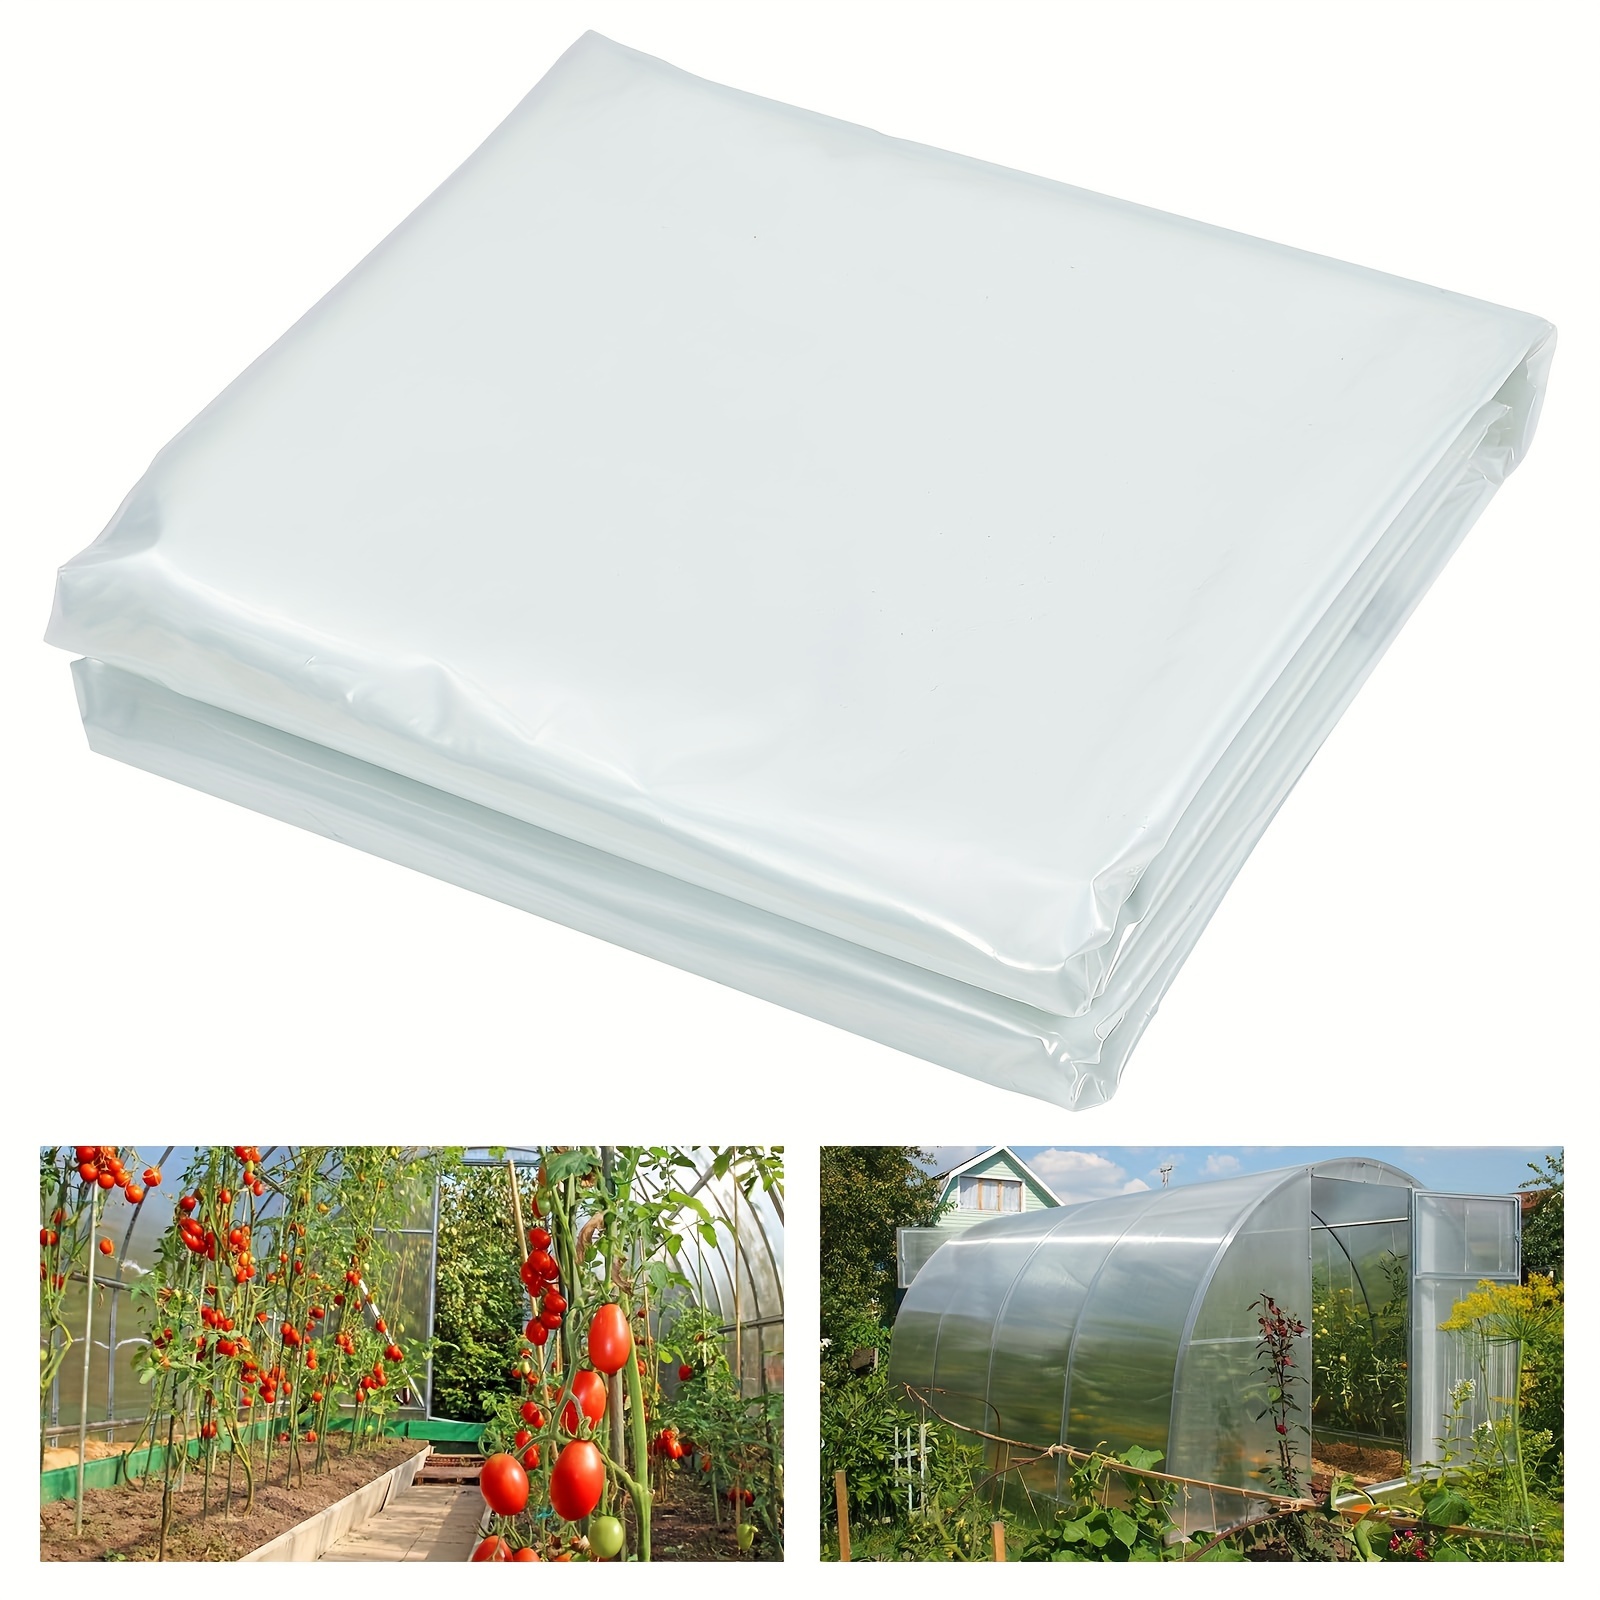 

Greenhouse Plastic Sheeting Film Cover 25ft X 40ft, Polyethylene Greenhouse Film 6 Mil Heavy Duty, Plastic Sheeting Uv Resistant For Farm, Garden, Windproof Frost& Dust Proof